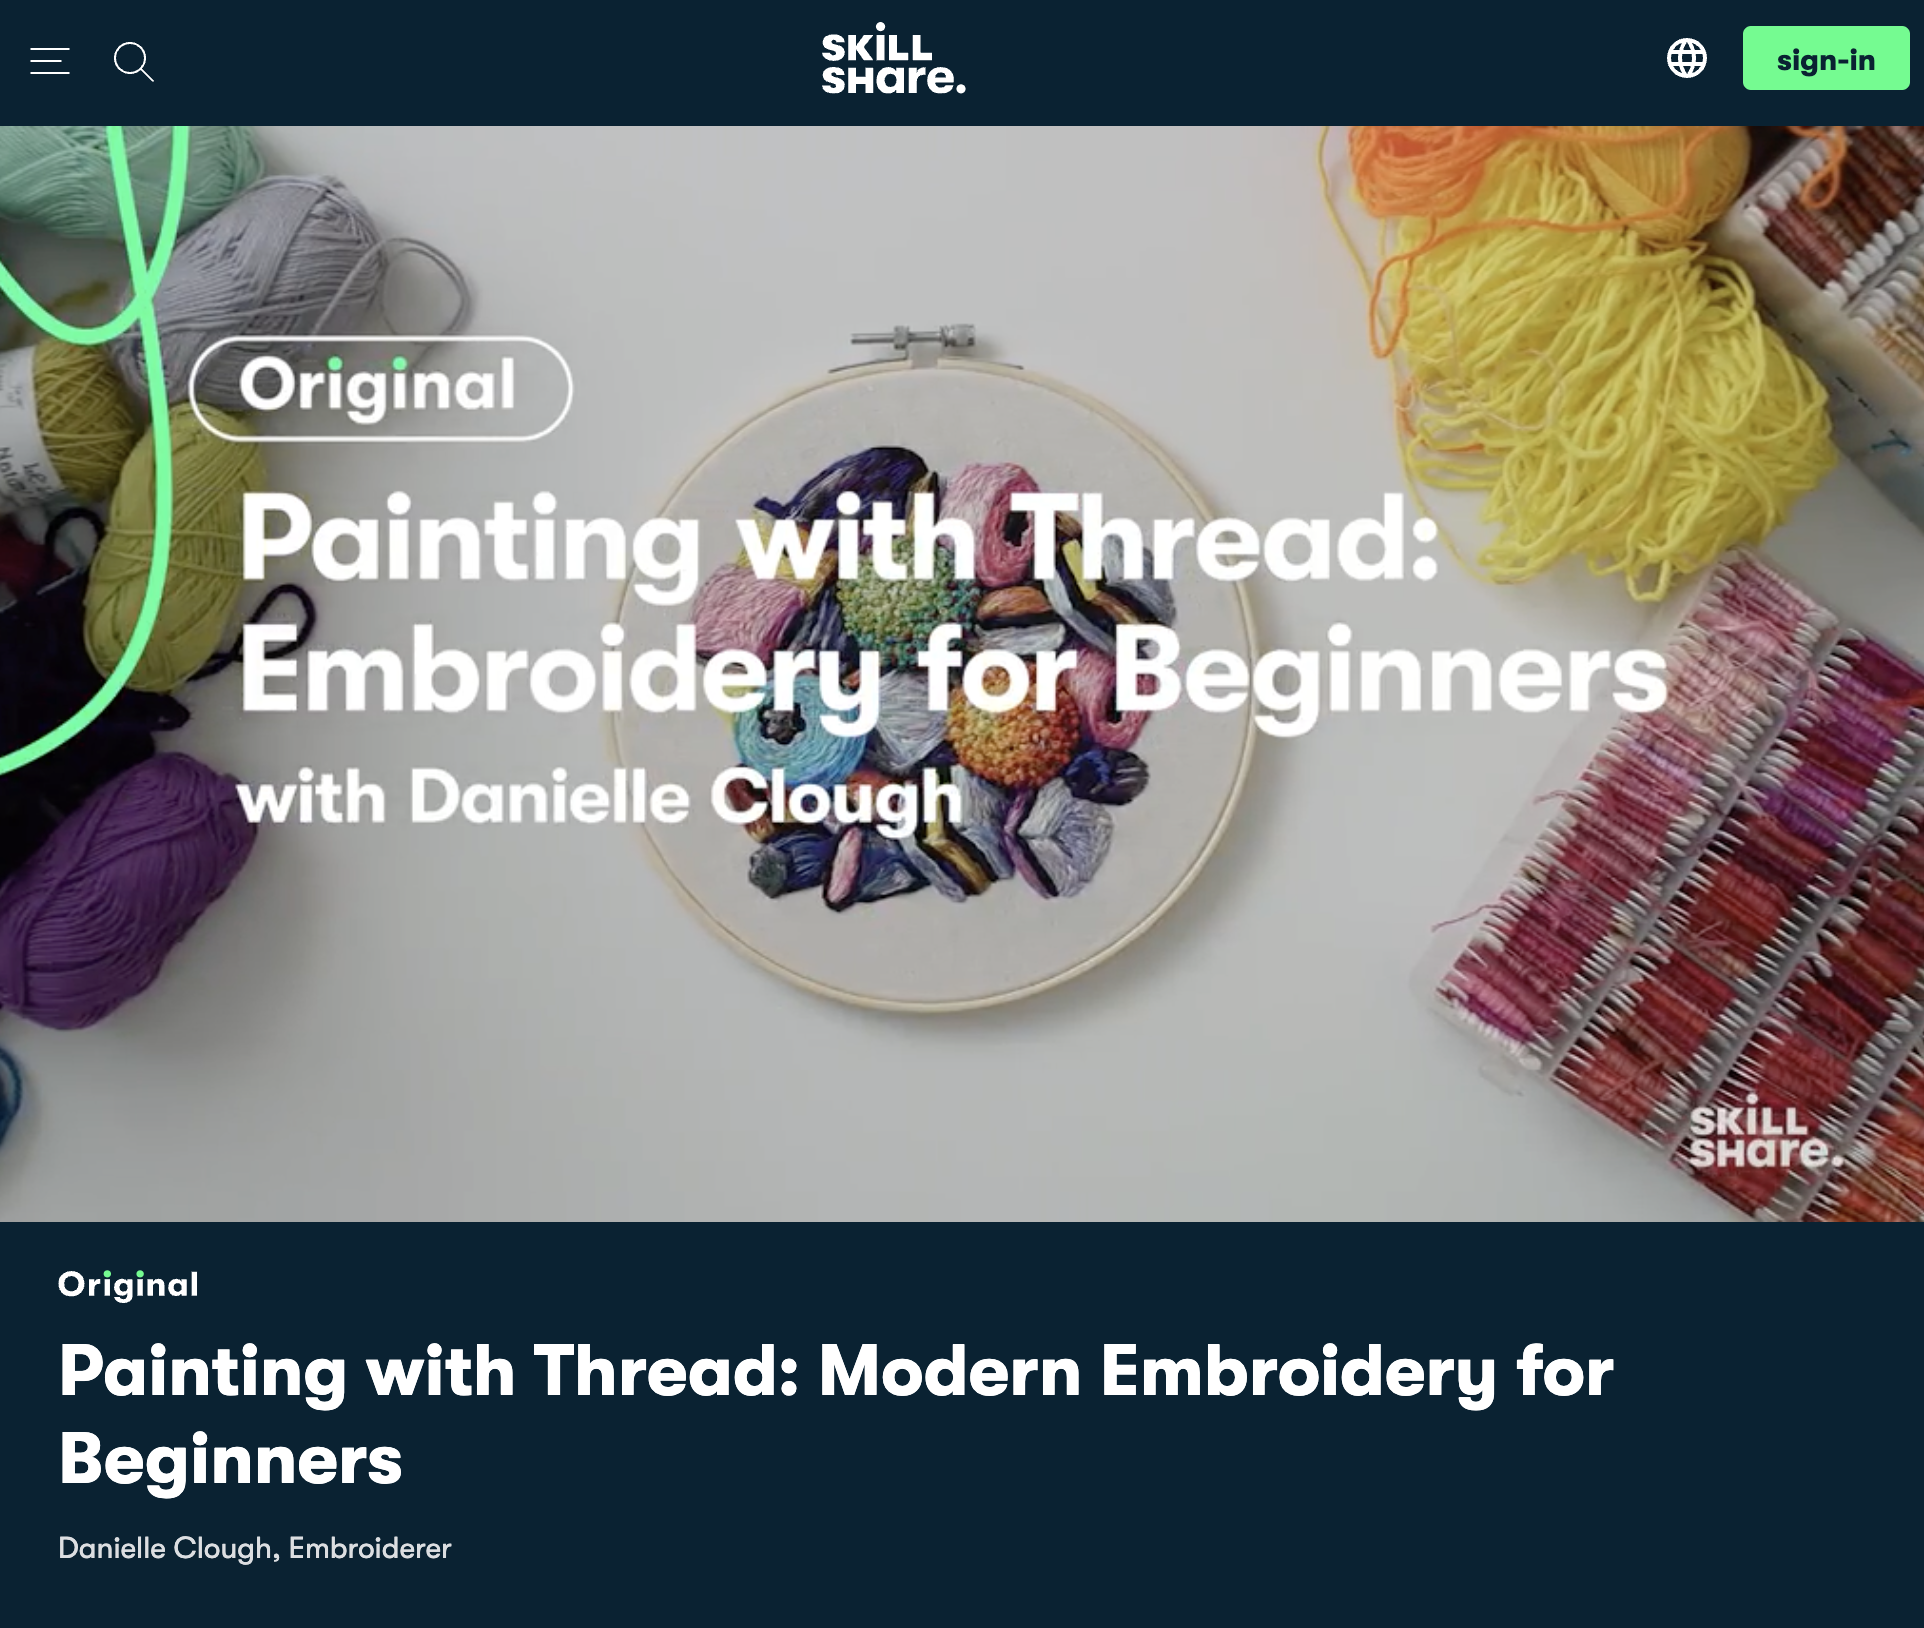 Painting with Thread Modern Embroidery for Beginners